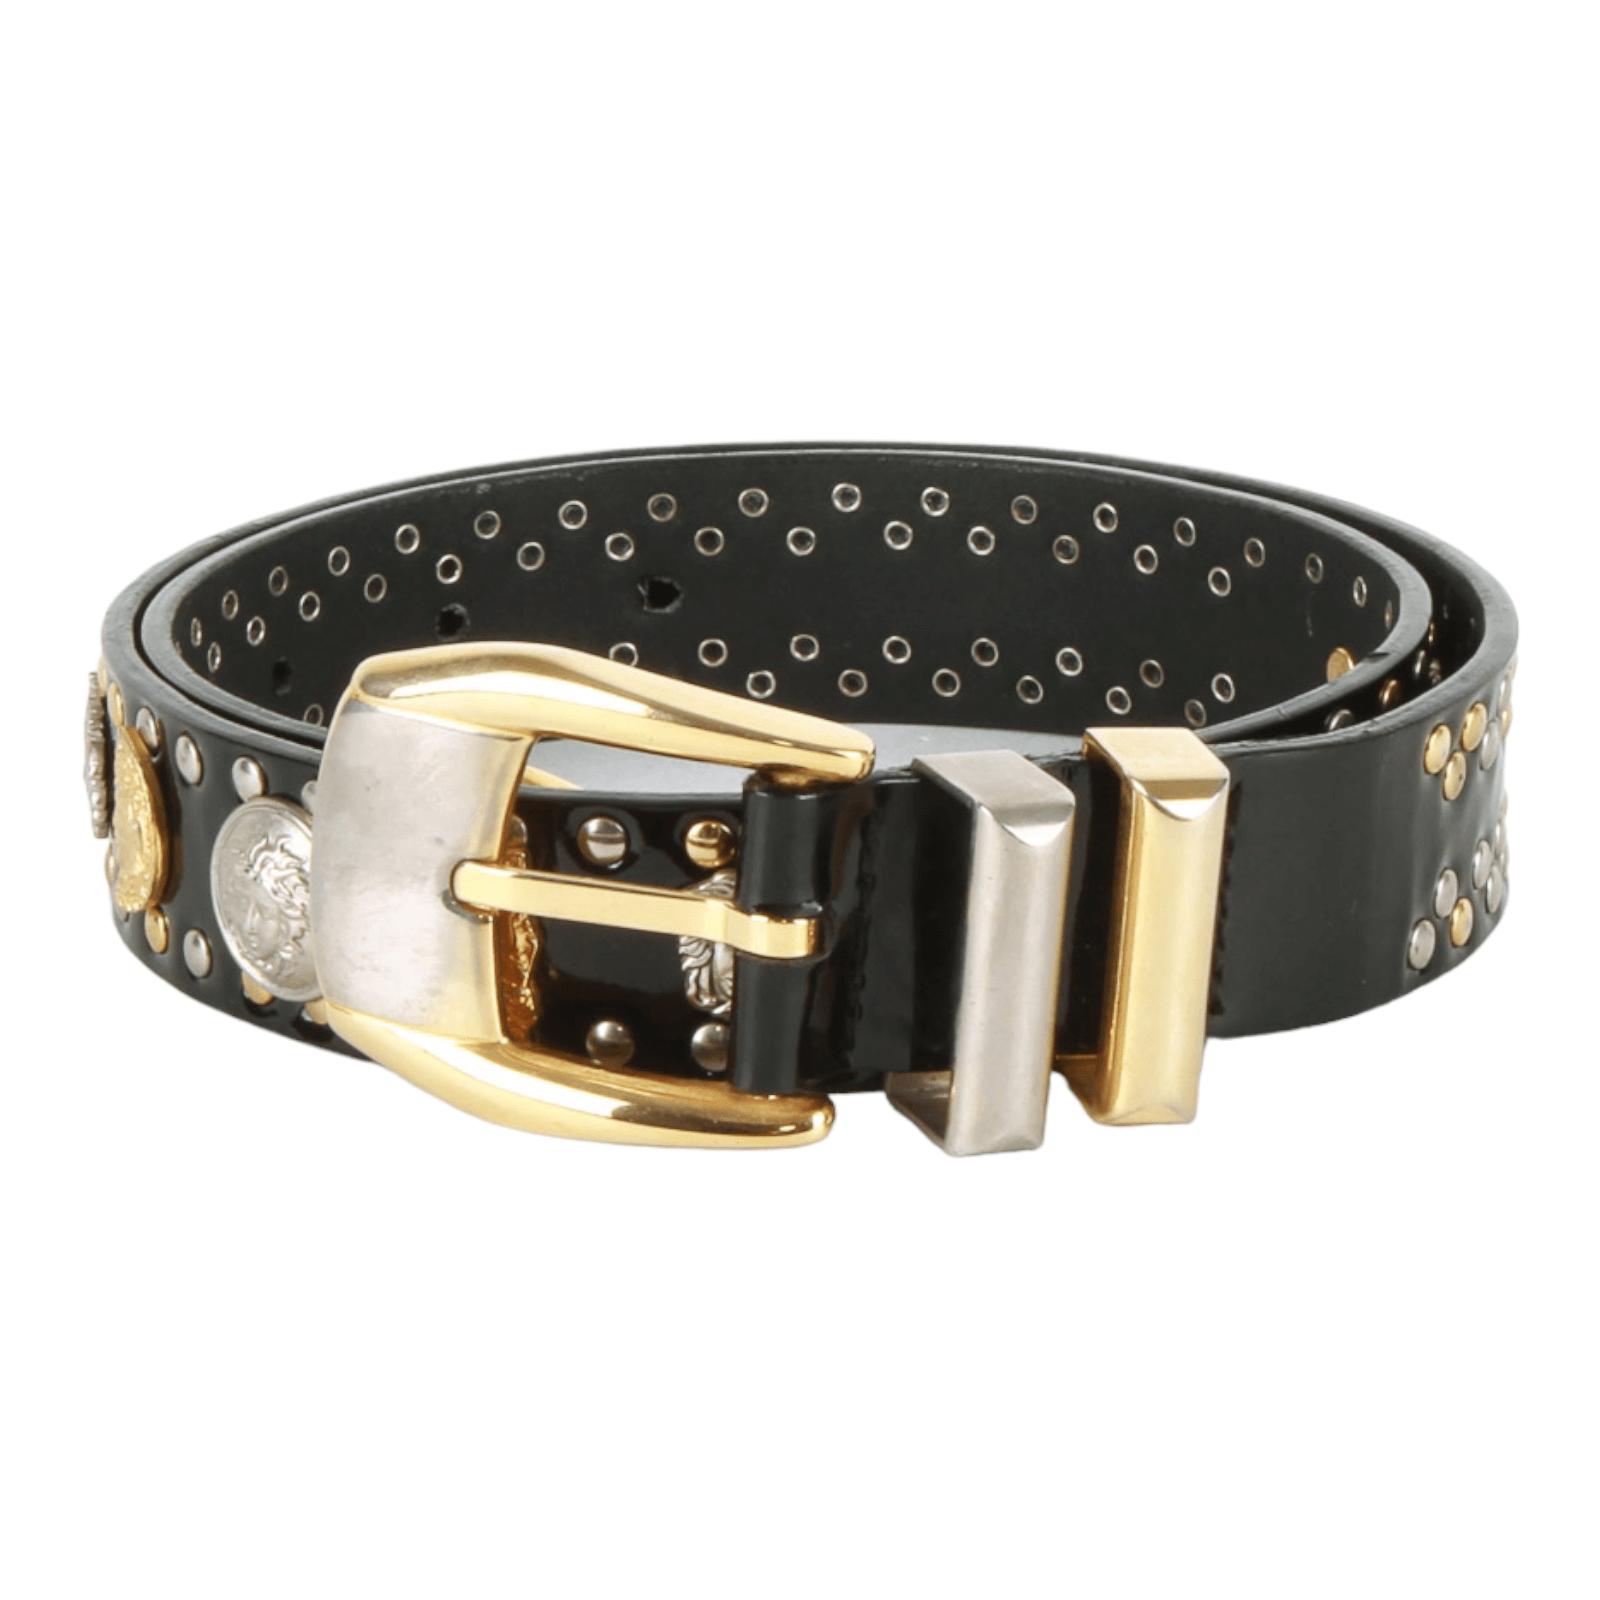 Authentic Gianni Versace Medusa coin and studded leather belt